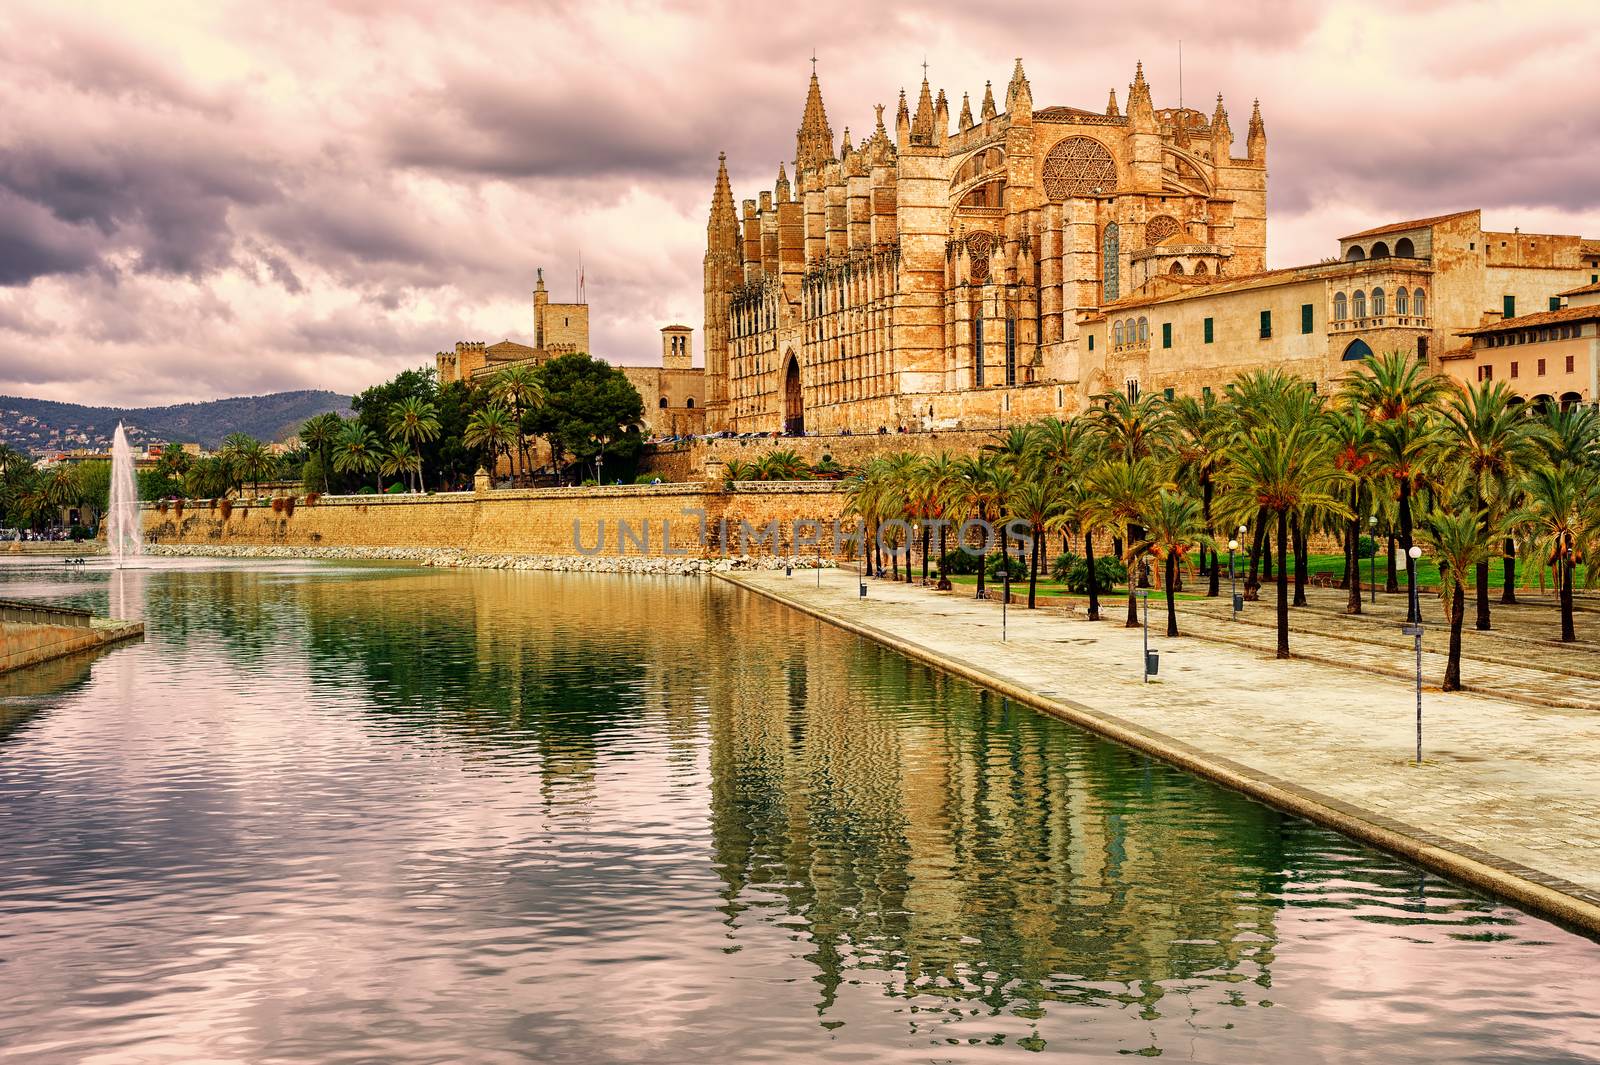 La Seu, the cathedral of Palma de Mallorca, reflecting in the water on sunset, Spain